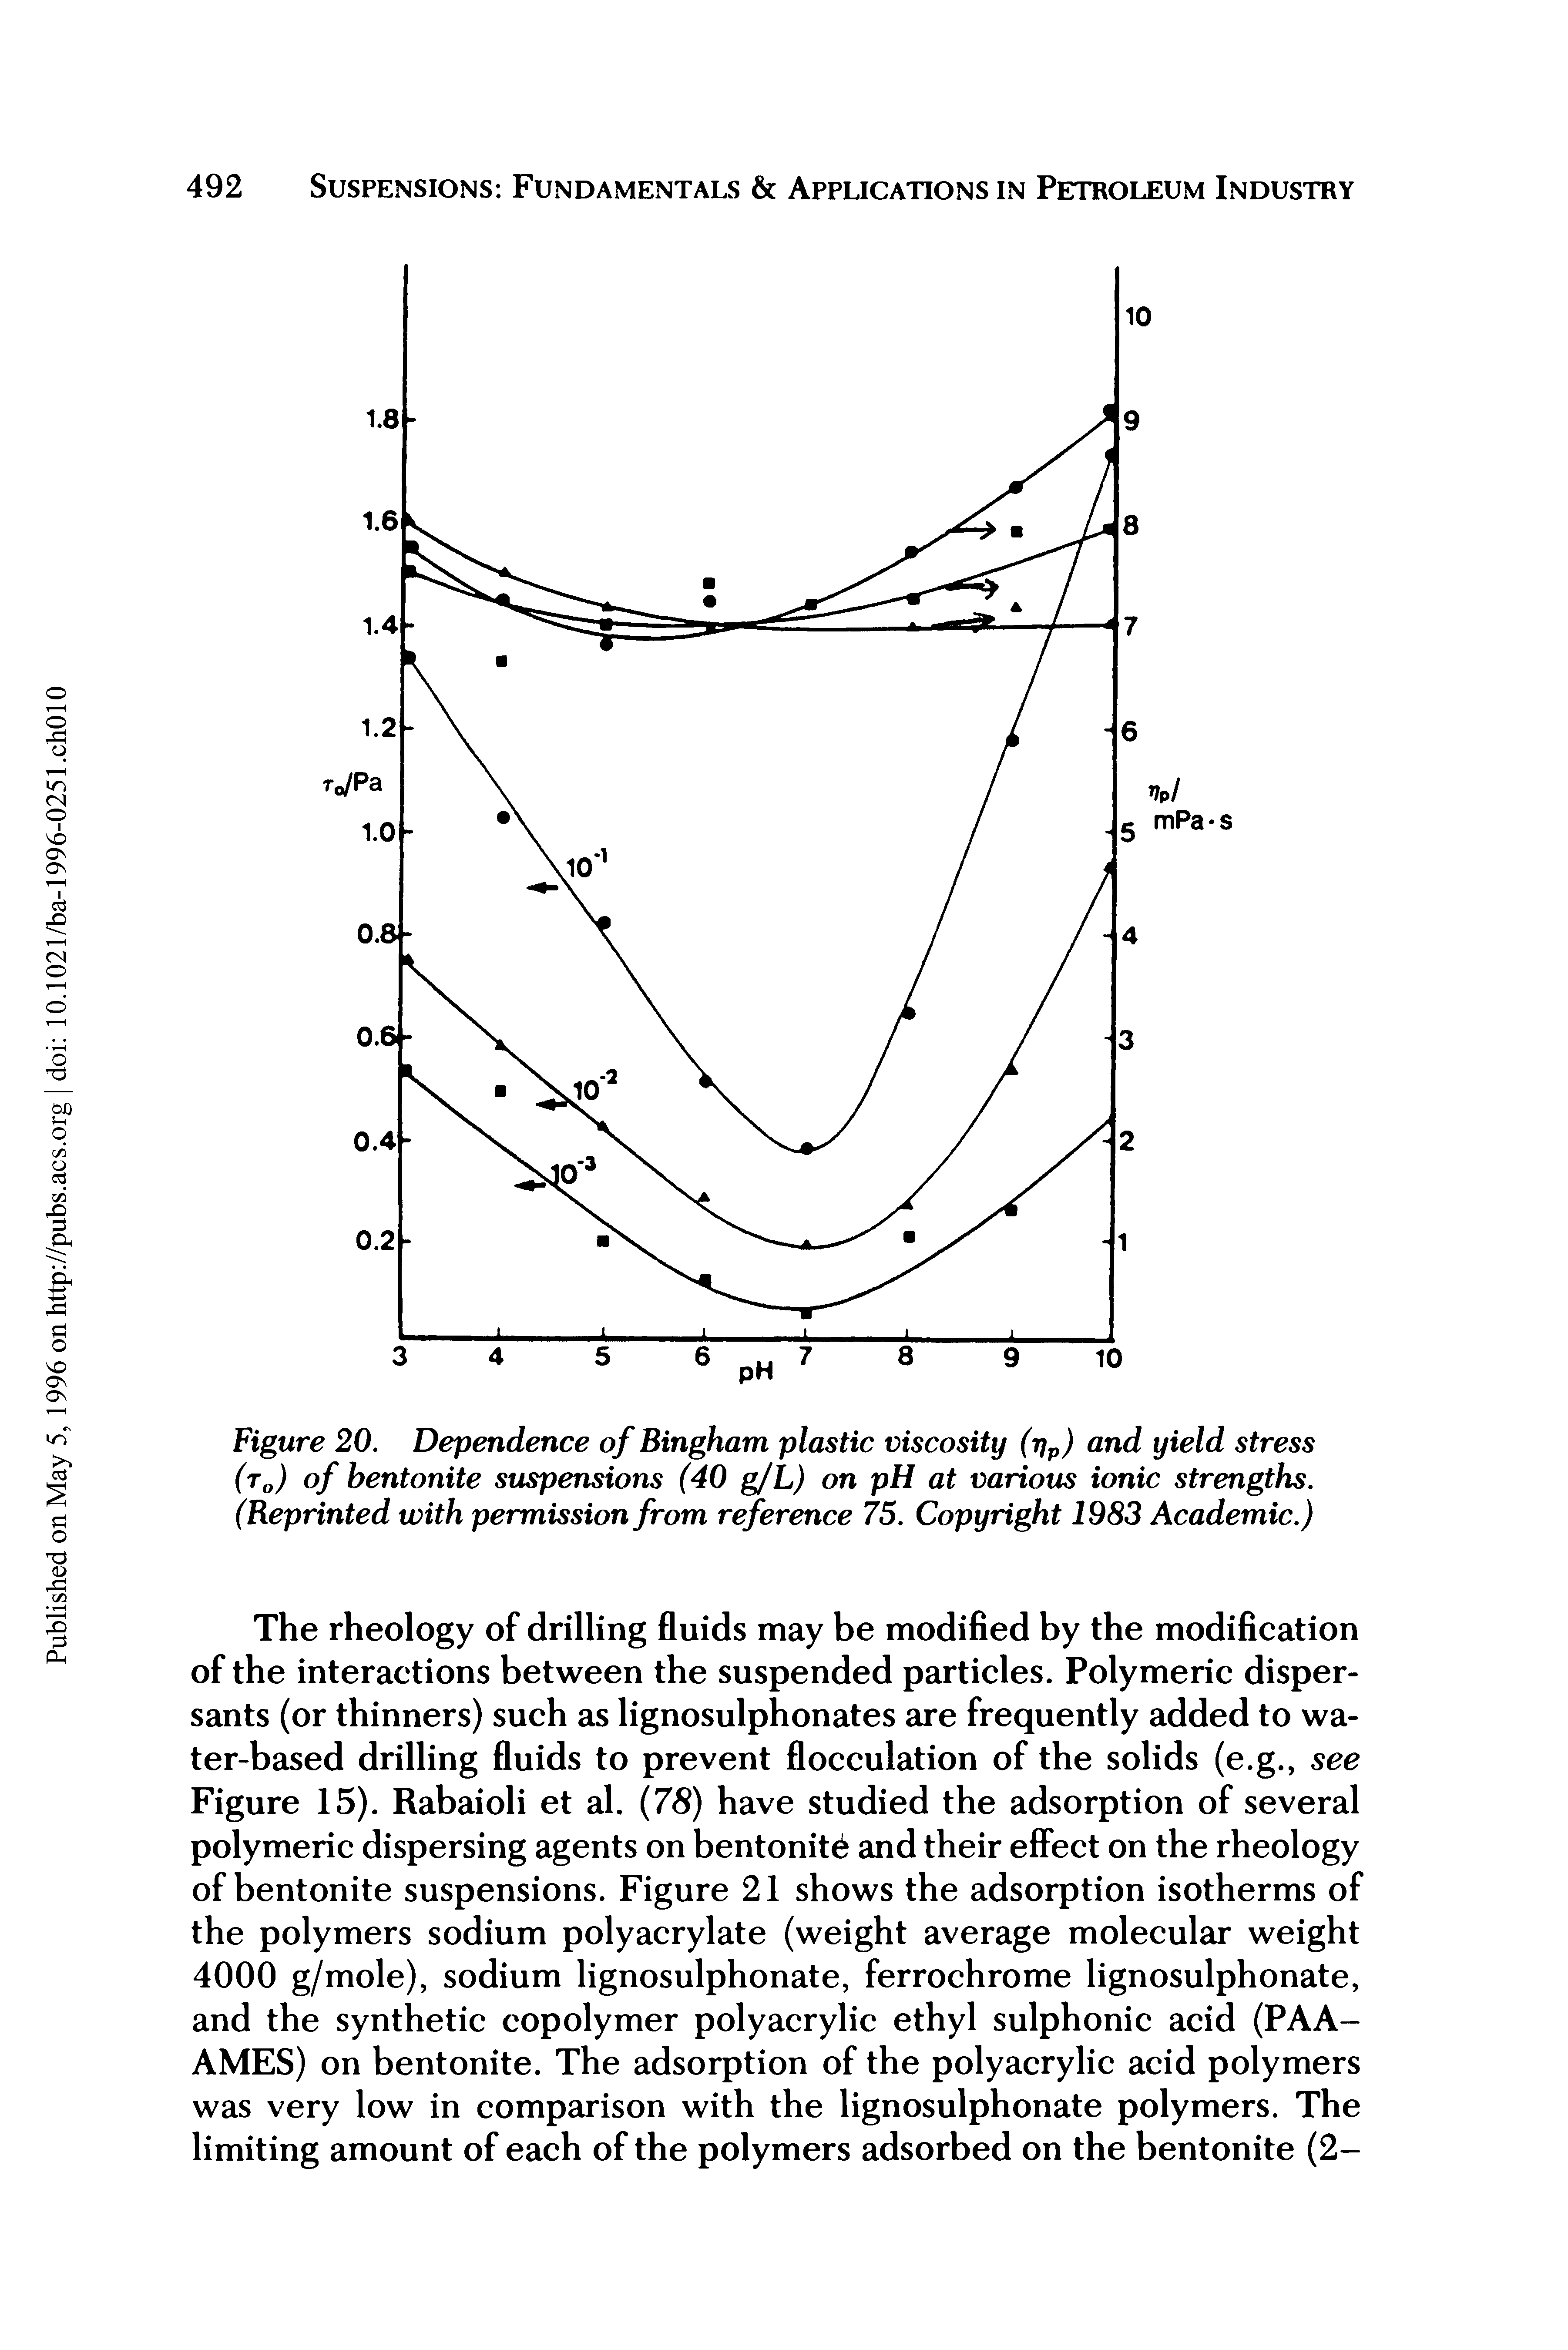 Figure 20. Dependence of Bingham plastic viscosity (rjp) and yield stress (t ) of bentonite suspensions (40 g/L) on pH at various ionic strengths. (Reprinted with permission from reference 75. Copyright 1983 Academic.)...